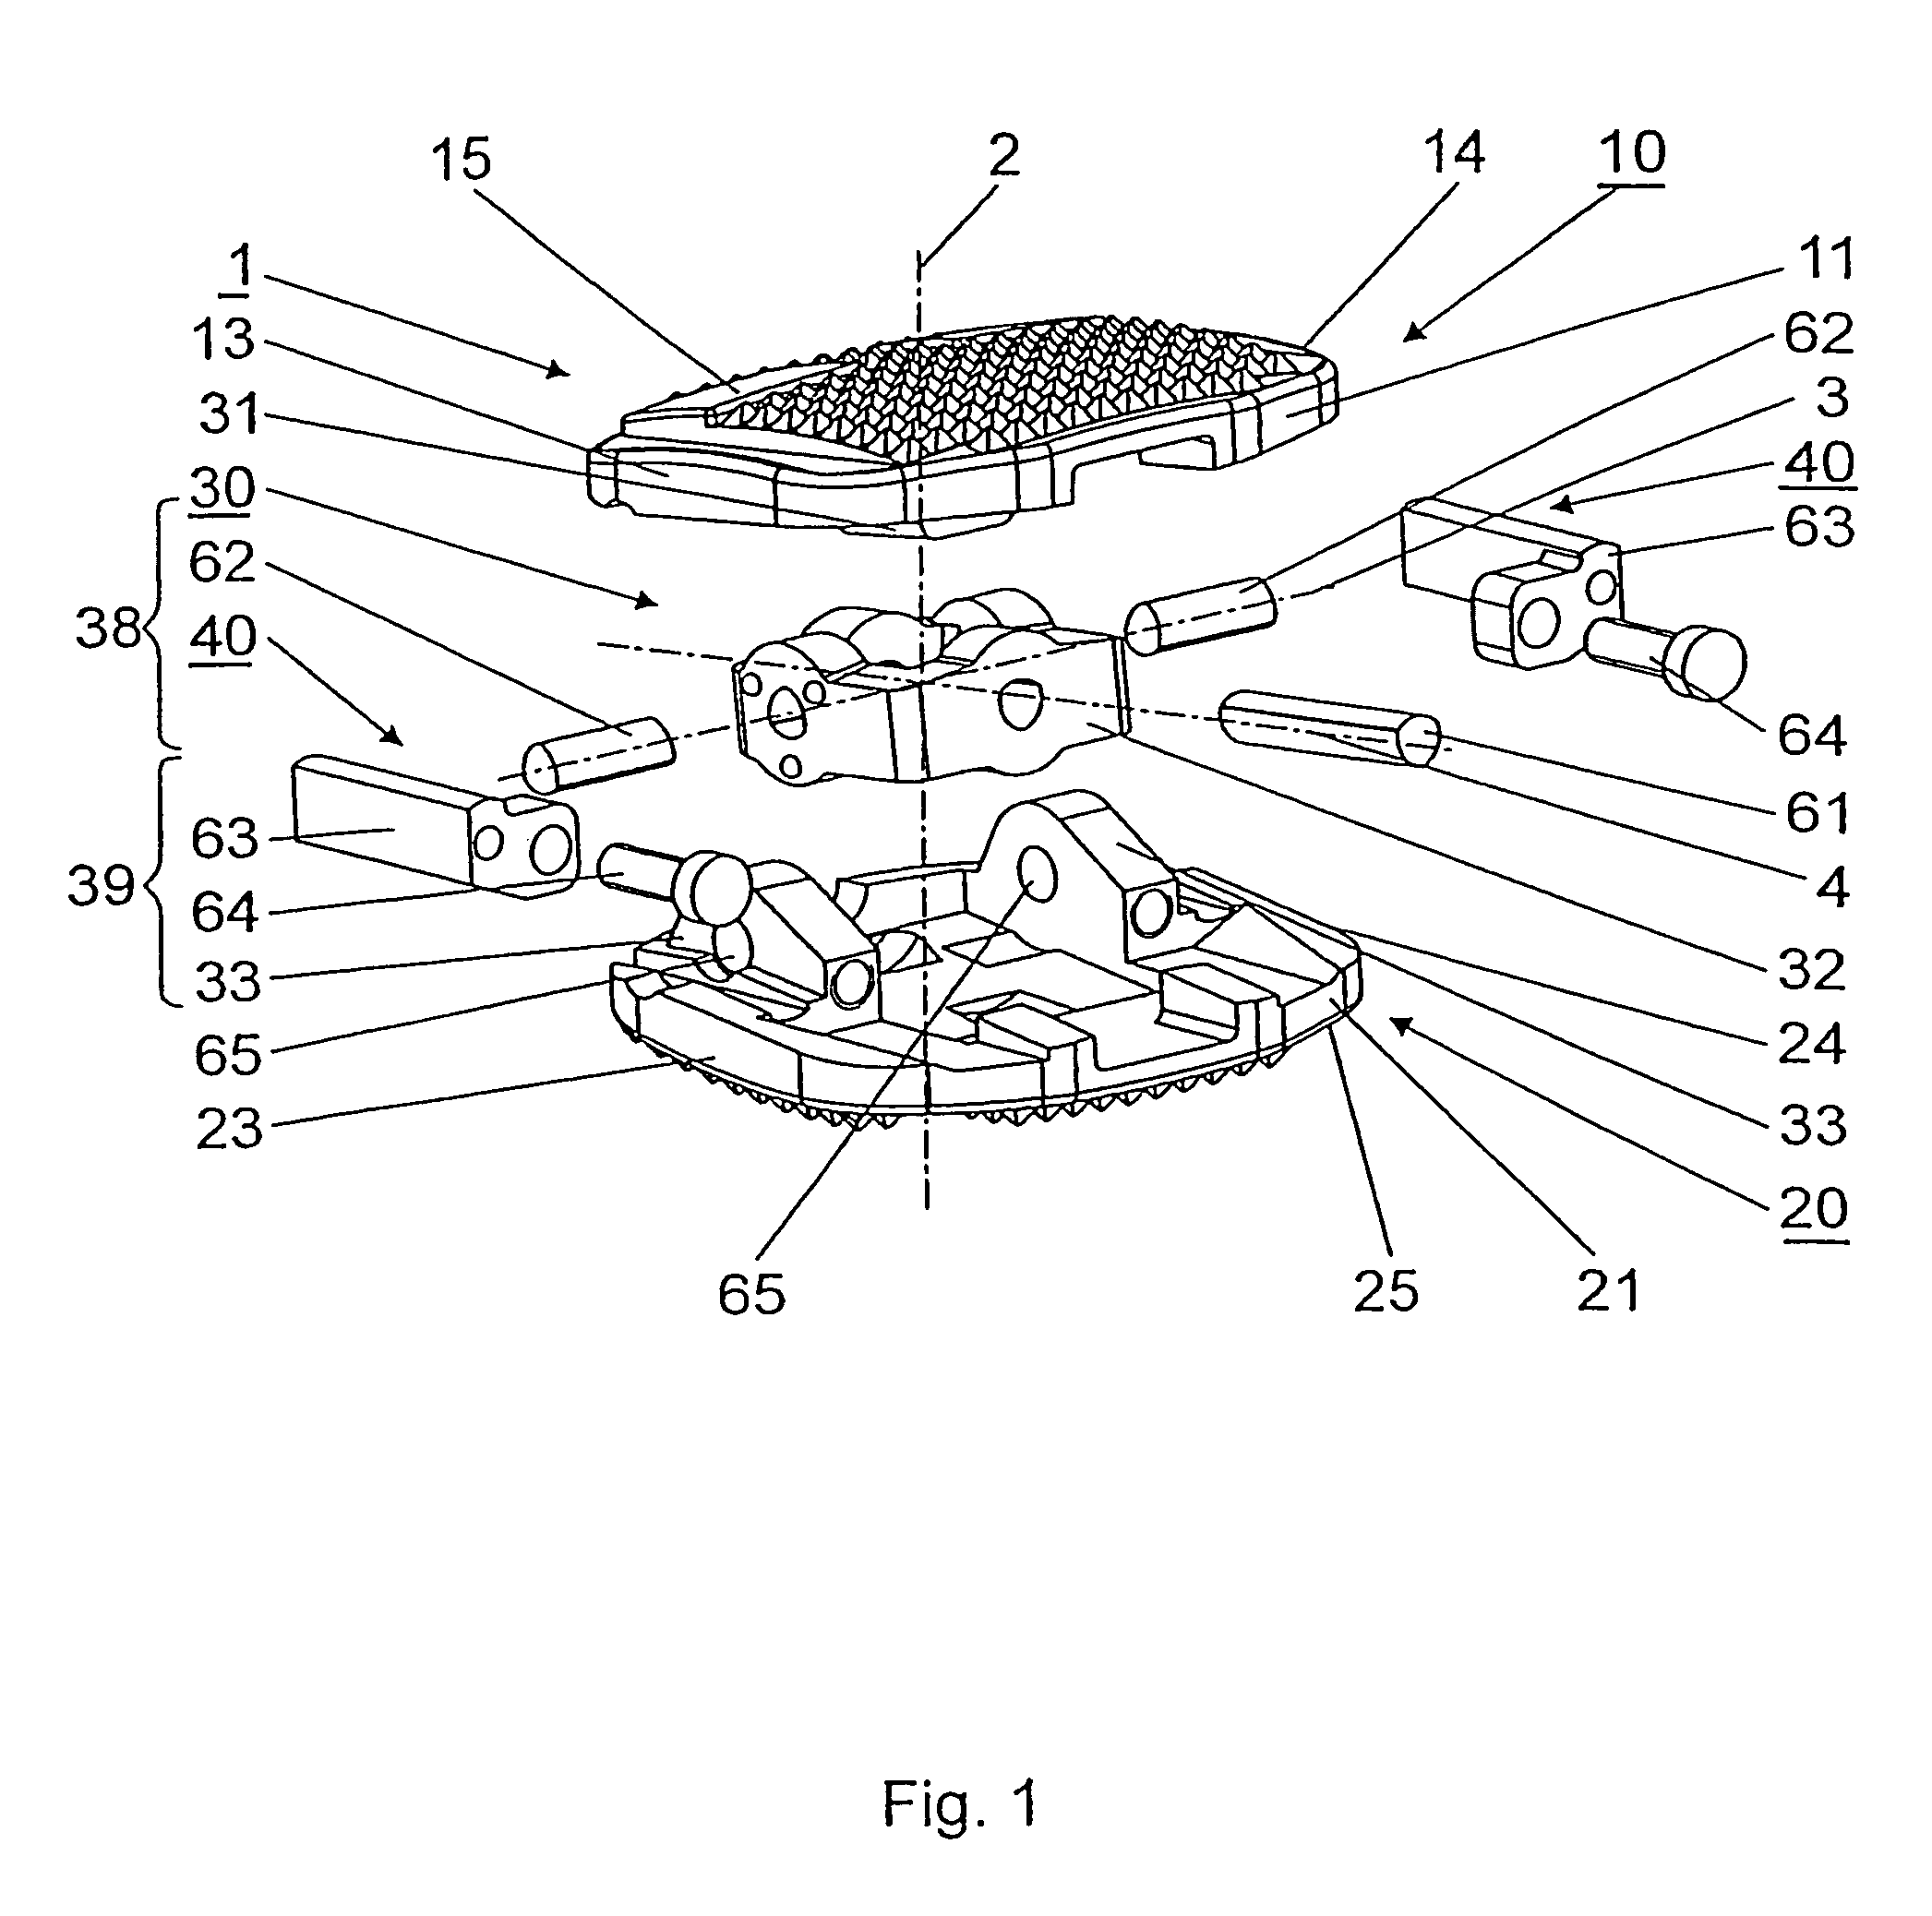 Intervertebral implant comprising joint parts that are mounted to form a universal joint